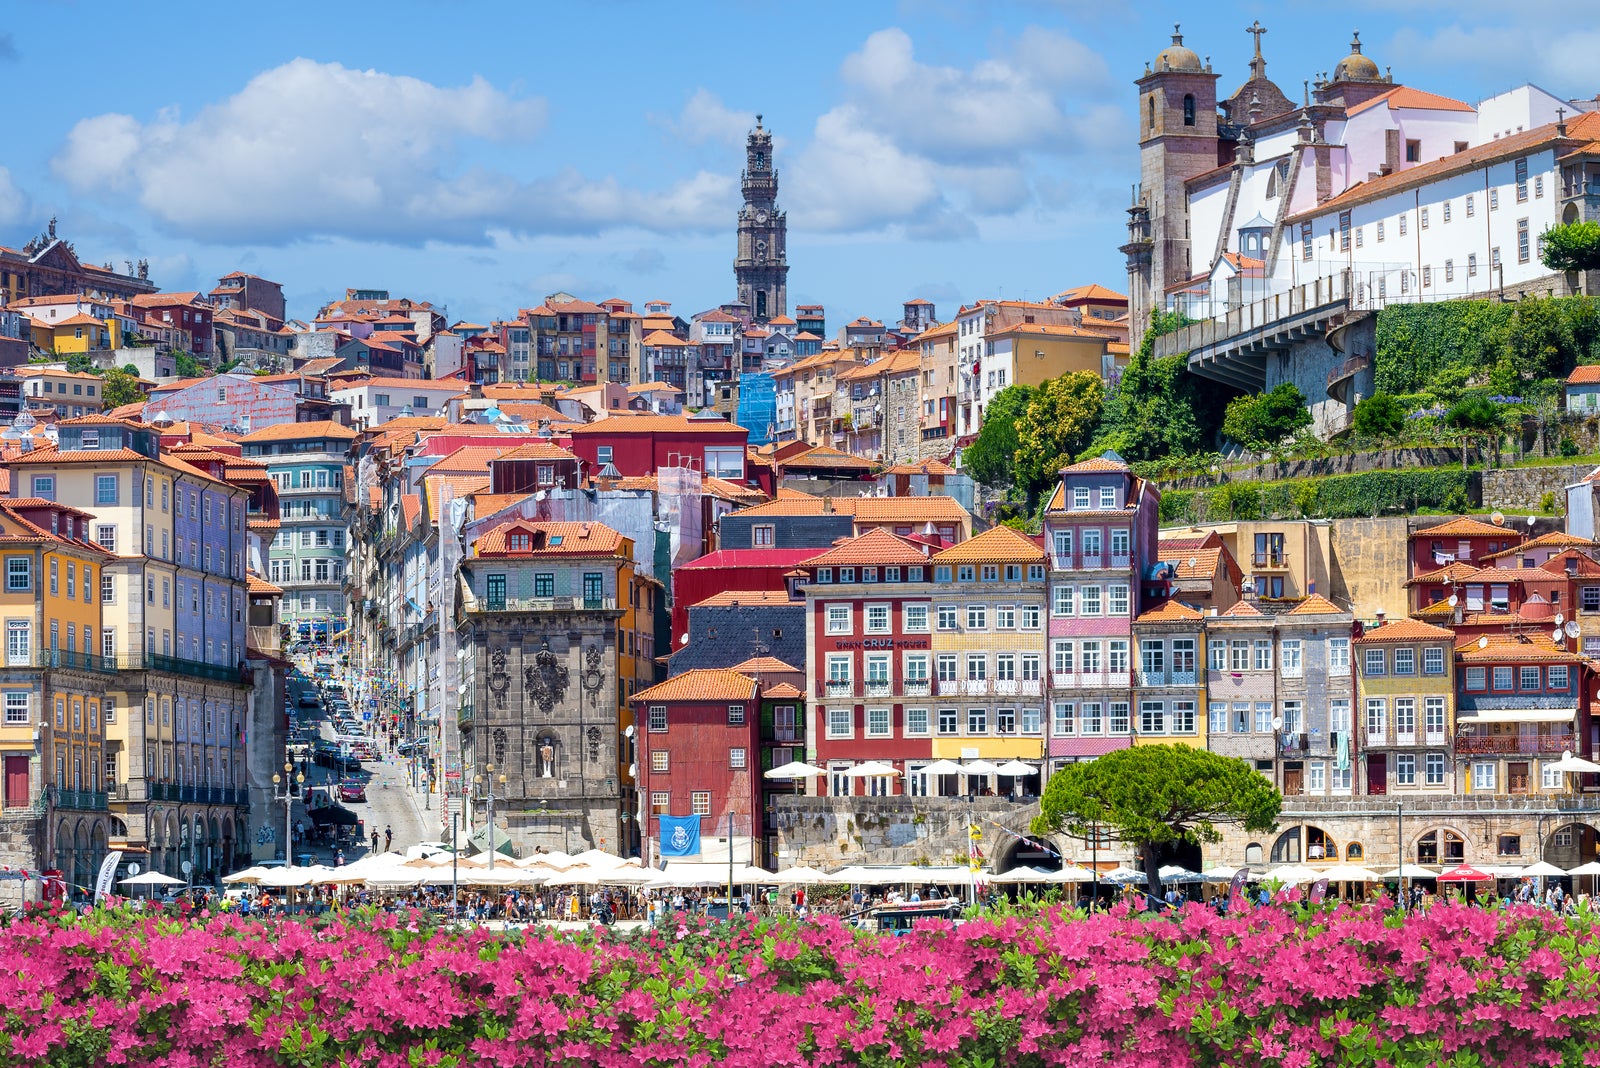 You are currently viewing Book flights to Portugal starting at $421 for this fall and winter